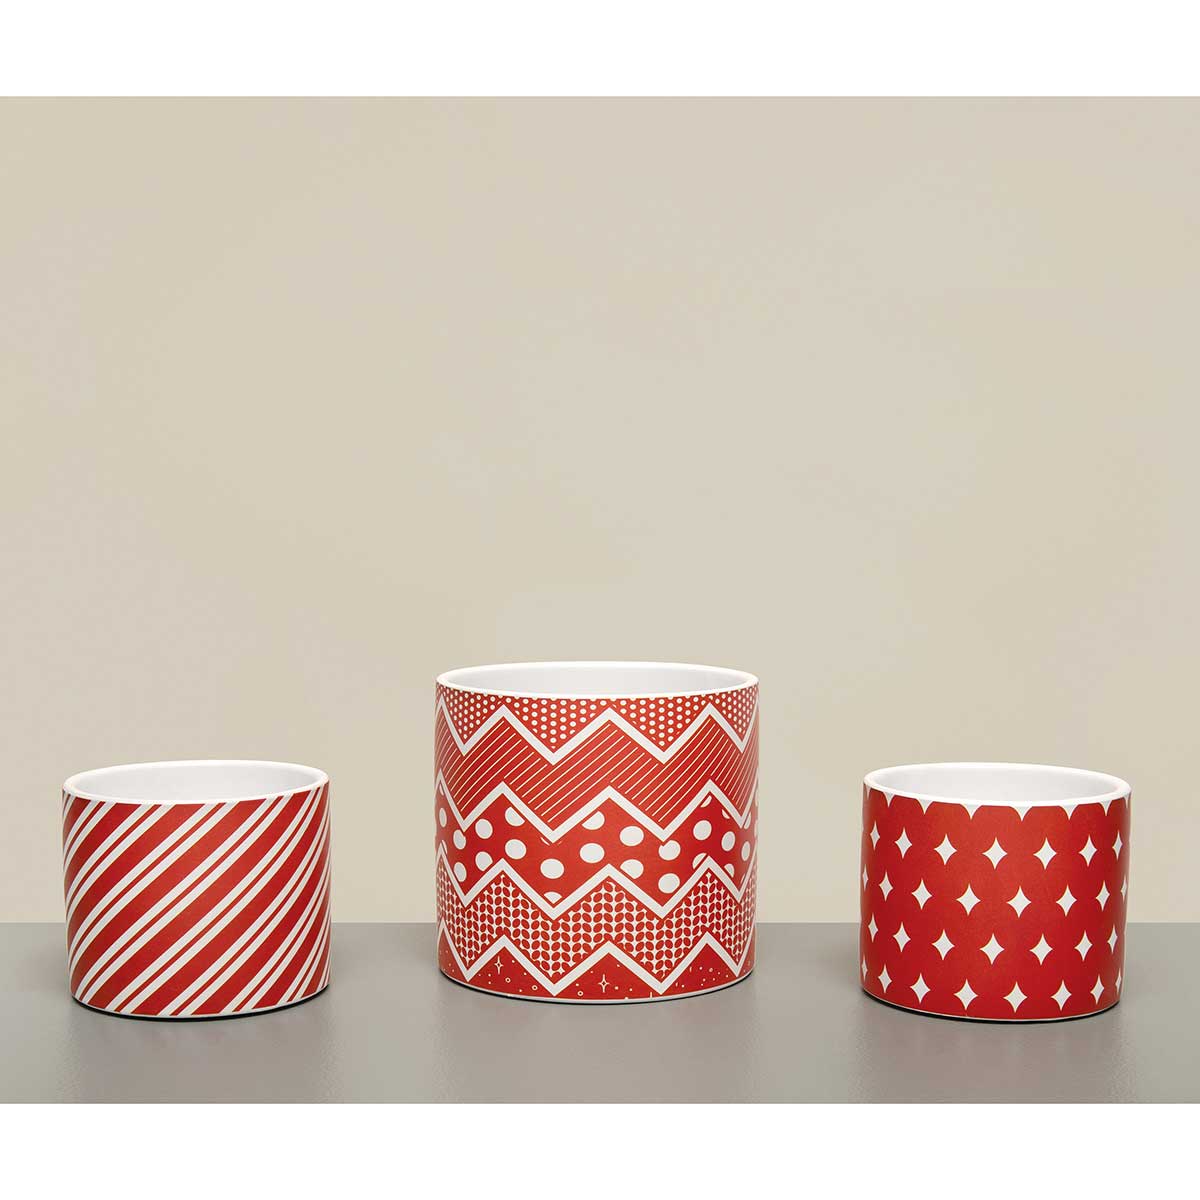 POT JOLLY ZIGZAG LARGE 5.25IN X 4.75IN CERAMIC - Click Image to Close